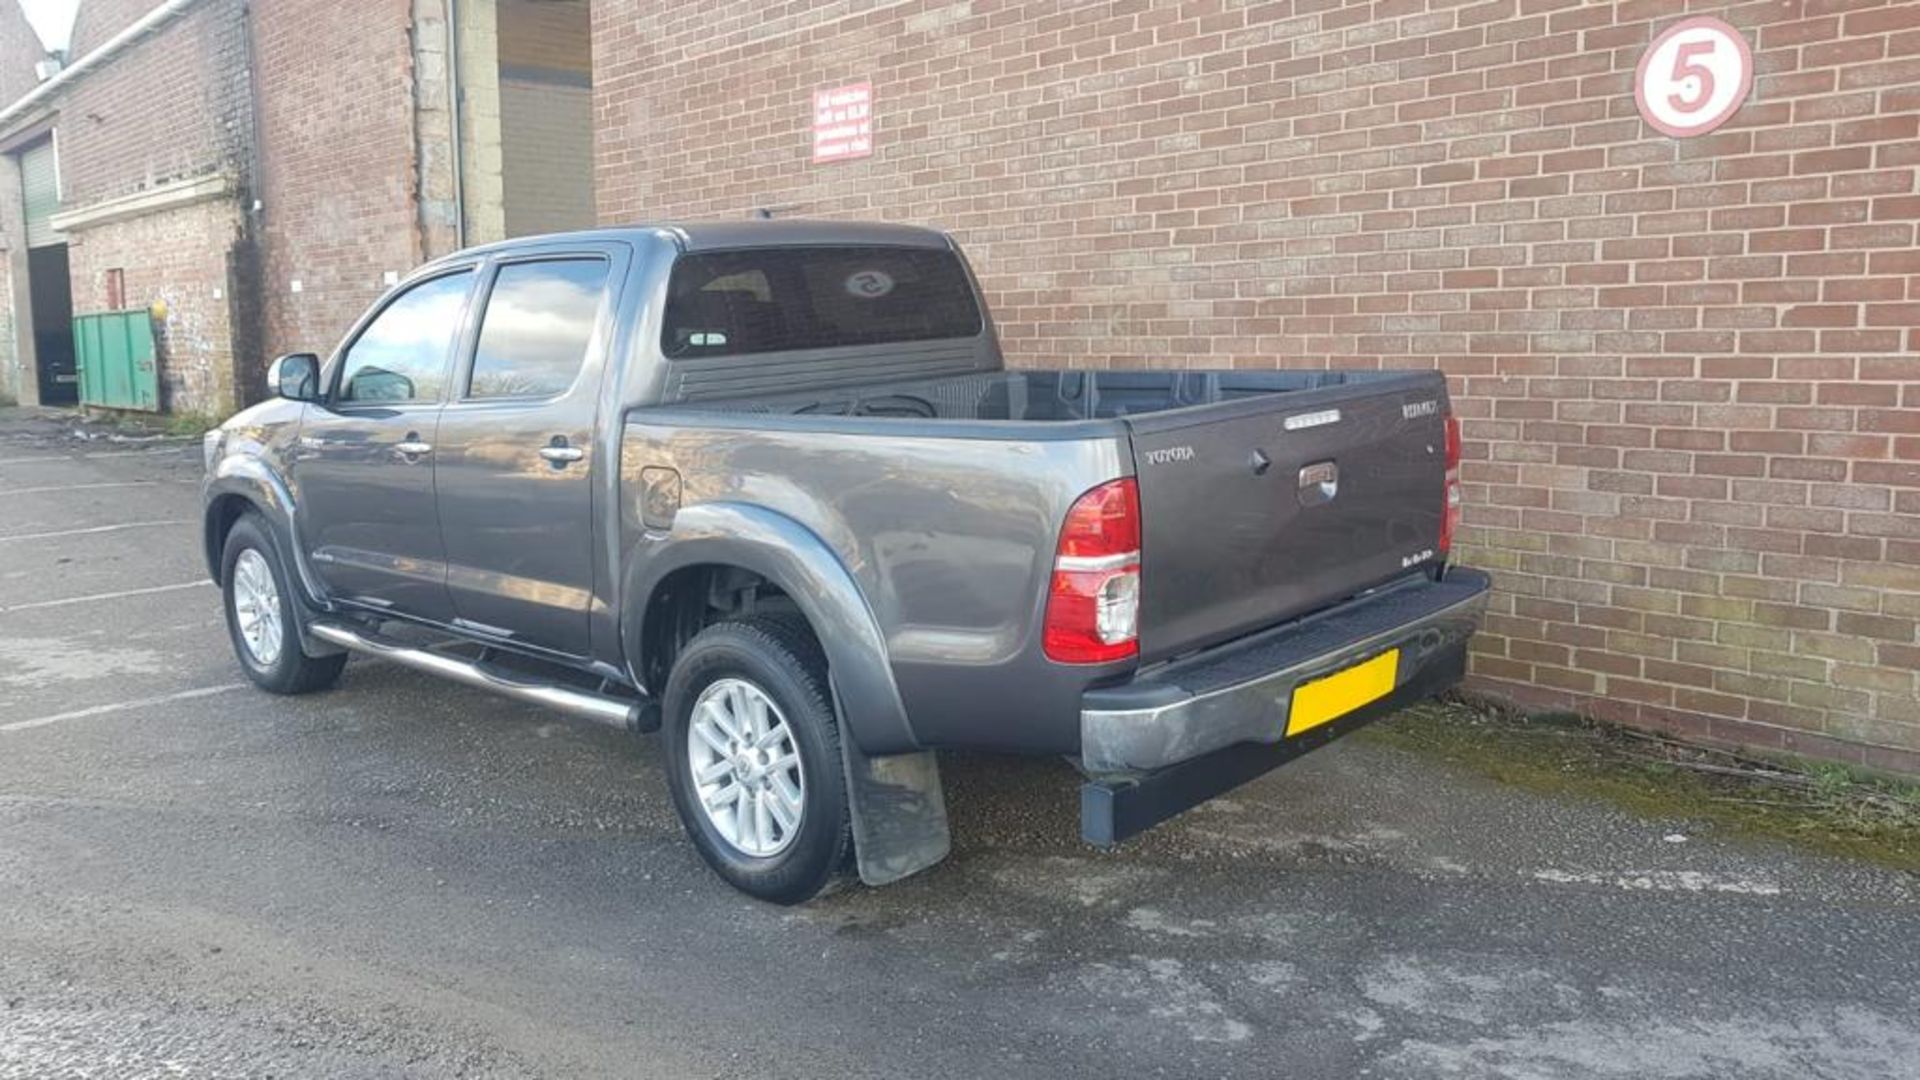 2015/64 REG TOYOTA HILUX INVINCIBLE D-4D 4X4 GREY DIESEL LIGHT UTILITY, SHOWING 1 FORMER KEEPER - Image 6 of 22